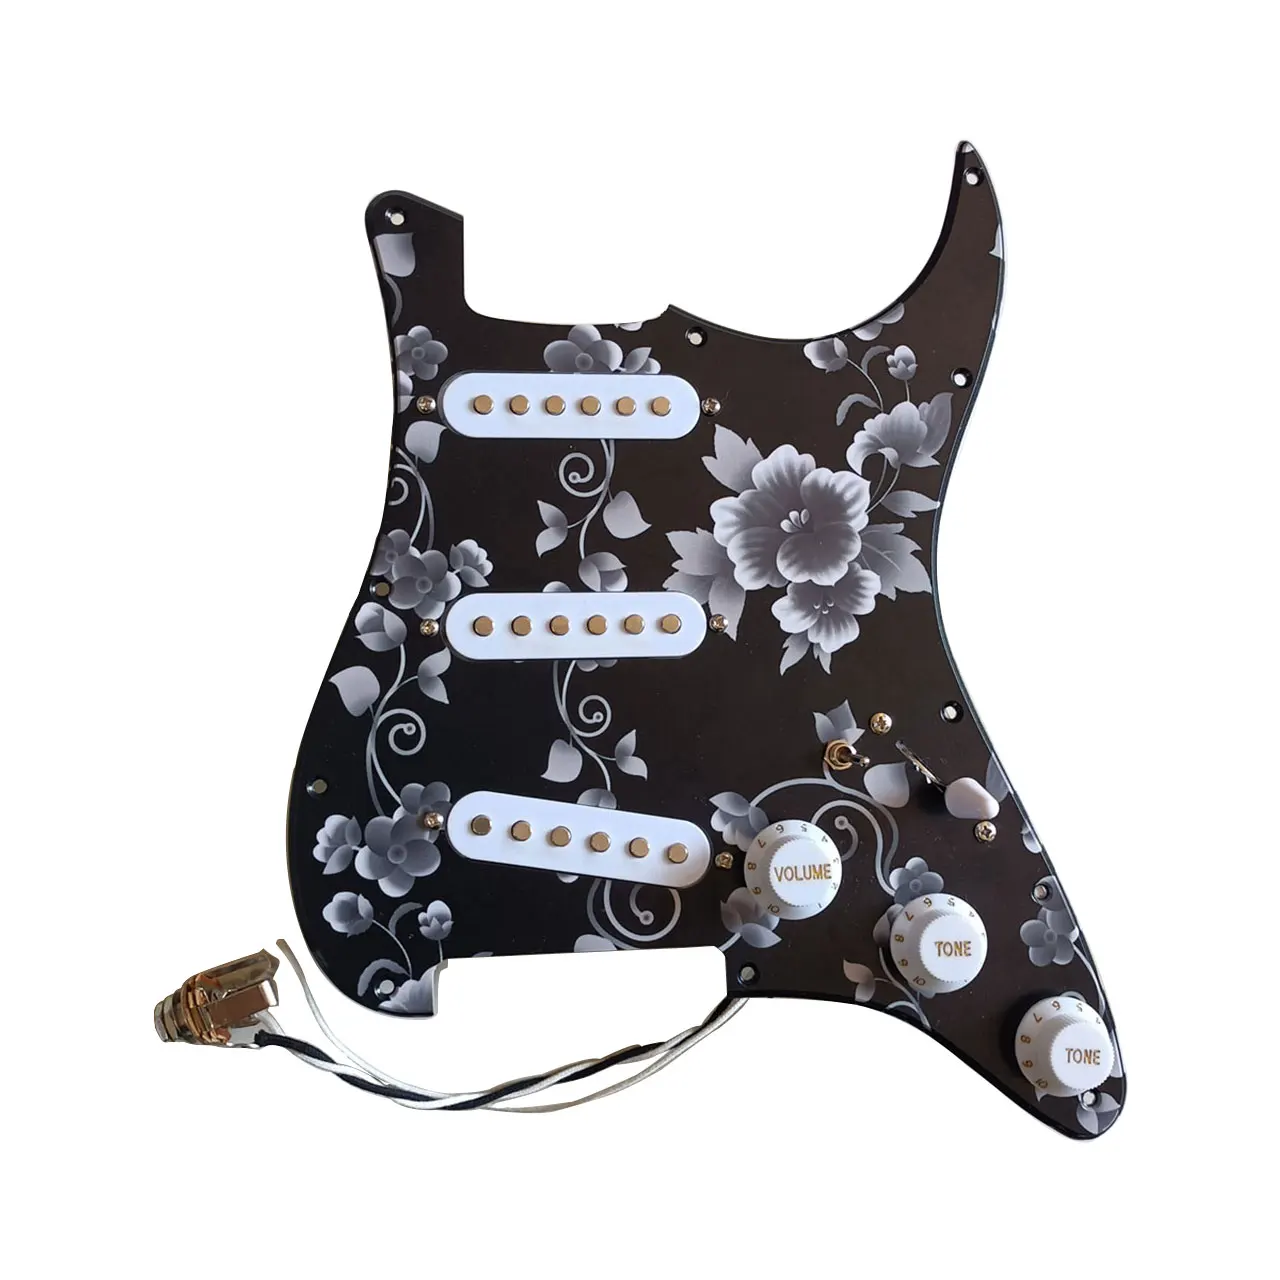 

Upgrade Loaded Prewired SSS Pickguard Multifunction Switch Single Coil Pickups 250K Copper Shaft Pots for Electric Guitar